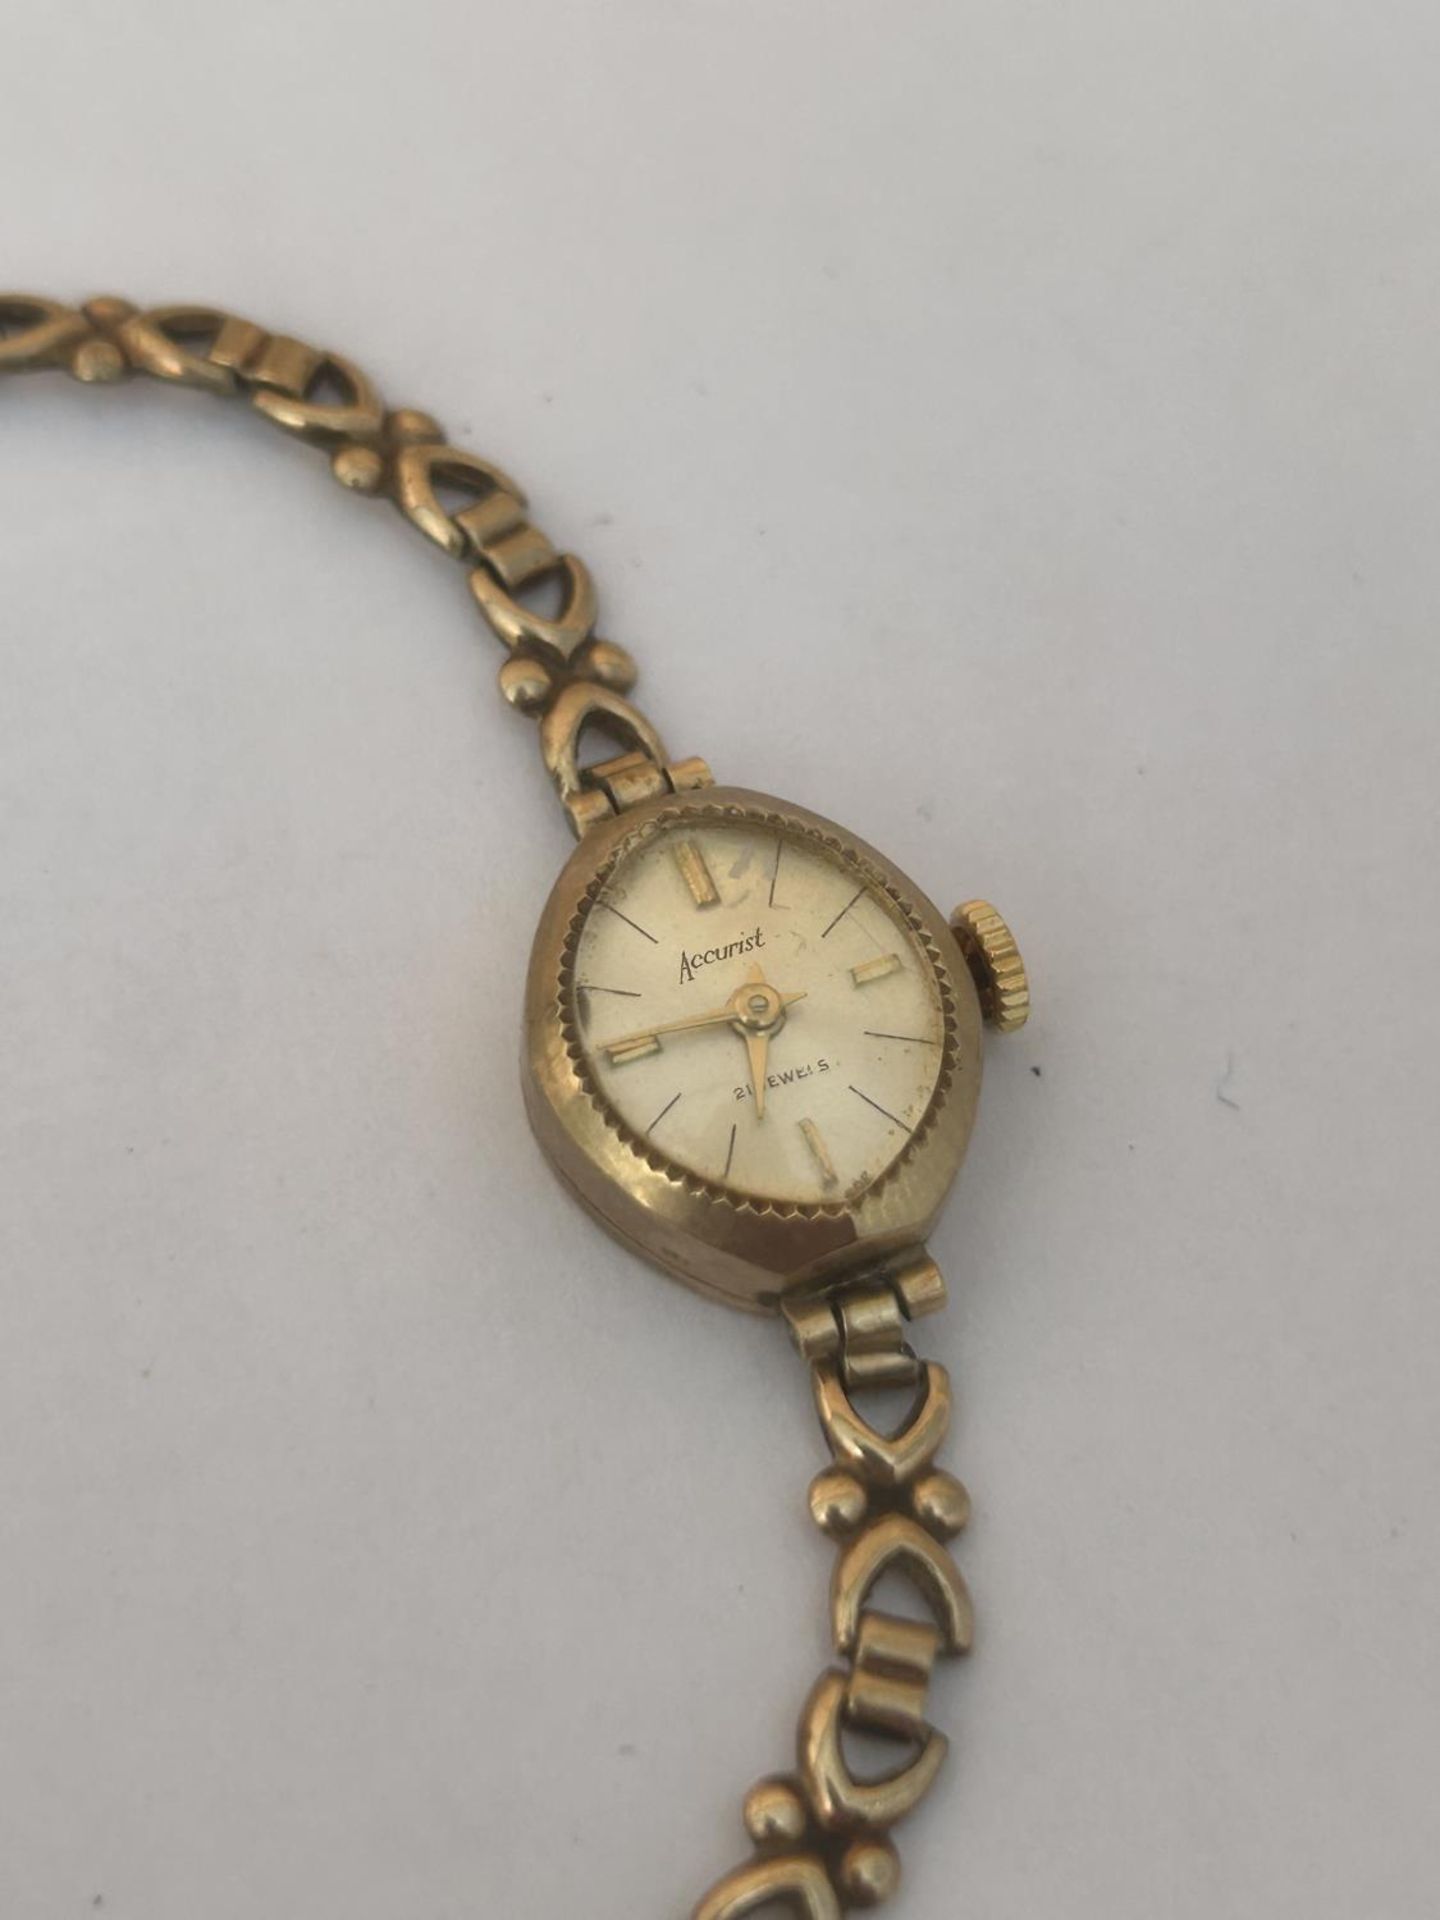 A HALLMARKED 9CT GOLD LADIES ACCURIST WATCH ON A 9CT GOLD BRACELET WITH A 21 JEWEL MOVEMENT, GROSS - Image 2 of 5